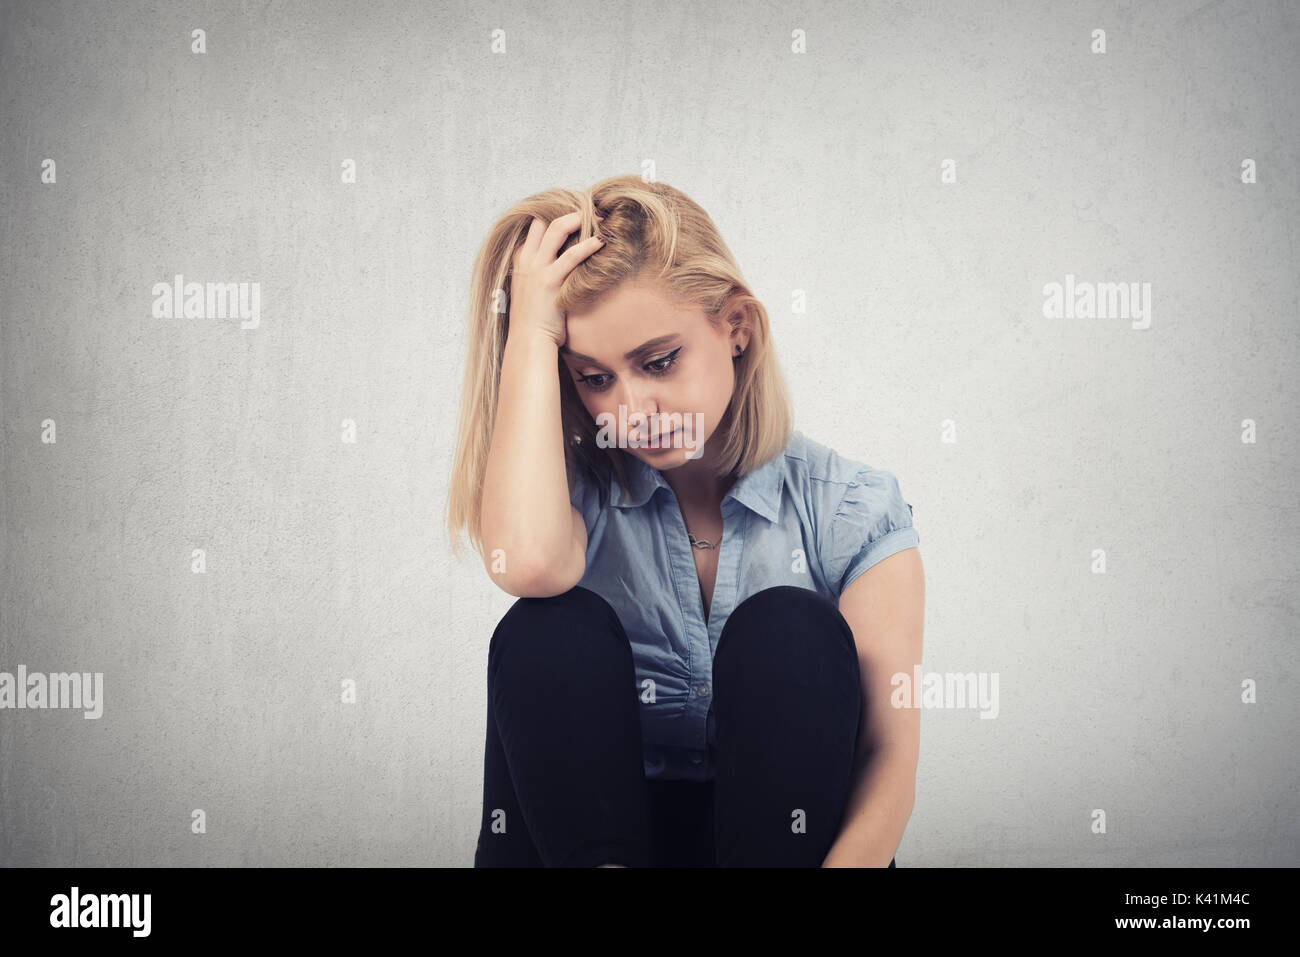 one sad woman sitting on the floor near a wall and holding her head in her hands Stock Photo